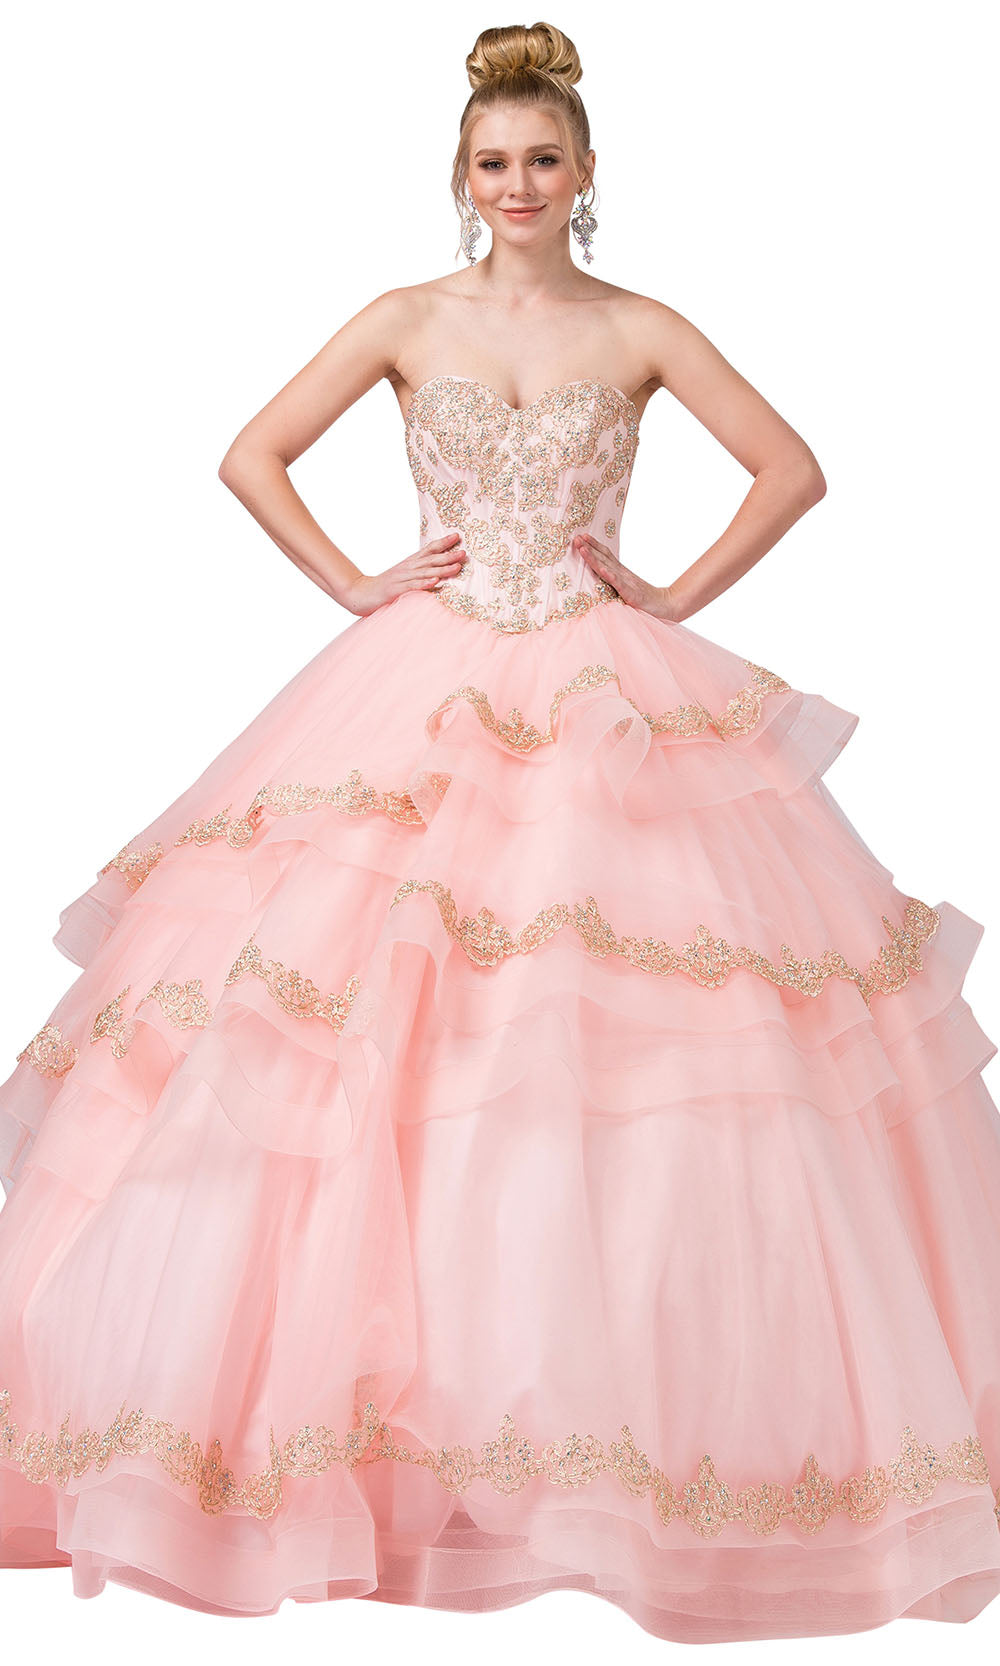 Dancing Queen - 1372 Applique-Trimmed Layered Ballgown In Pink